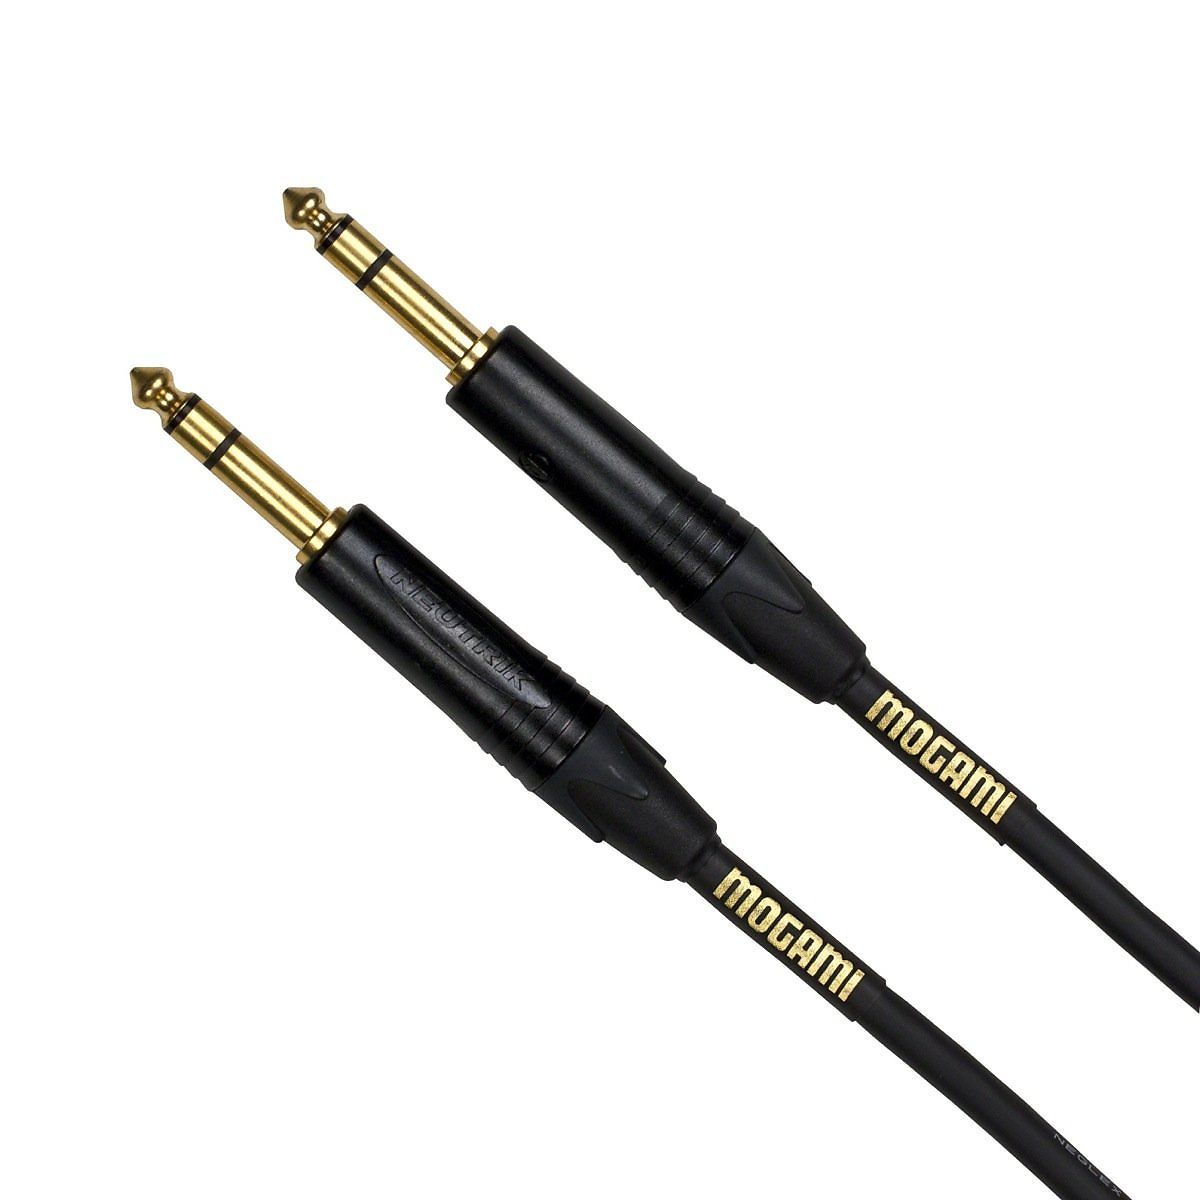 Mogami Gold 1/4 Inch TRS to 1/4 Inch TRS Patch Cable, 20 Foot